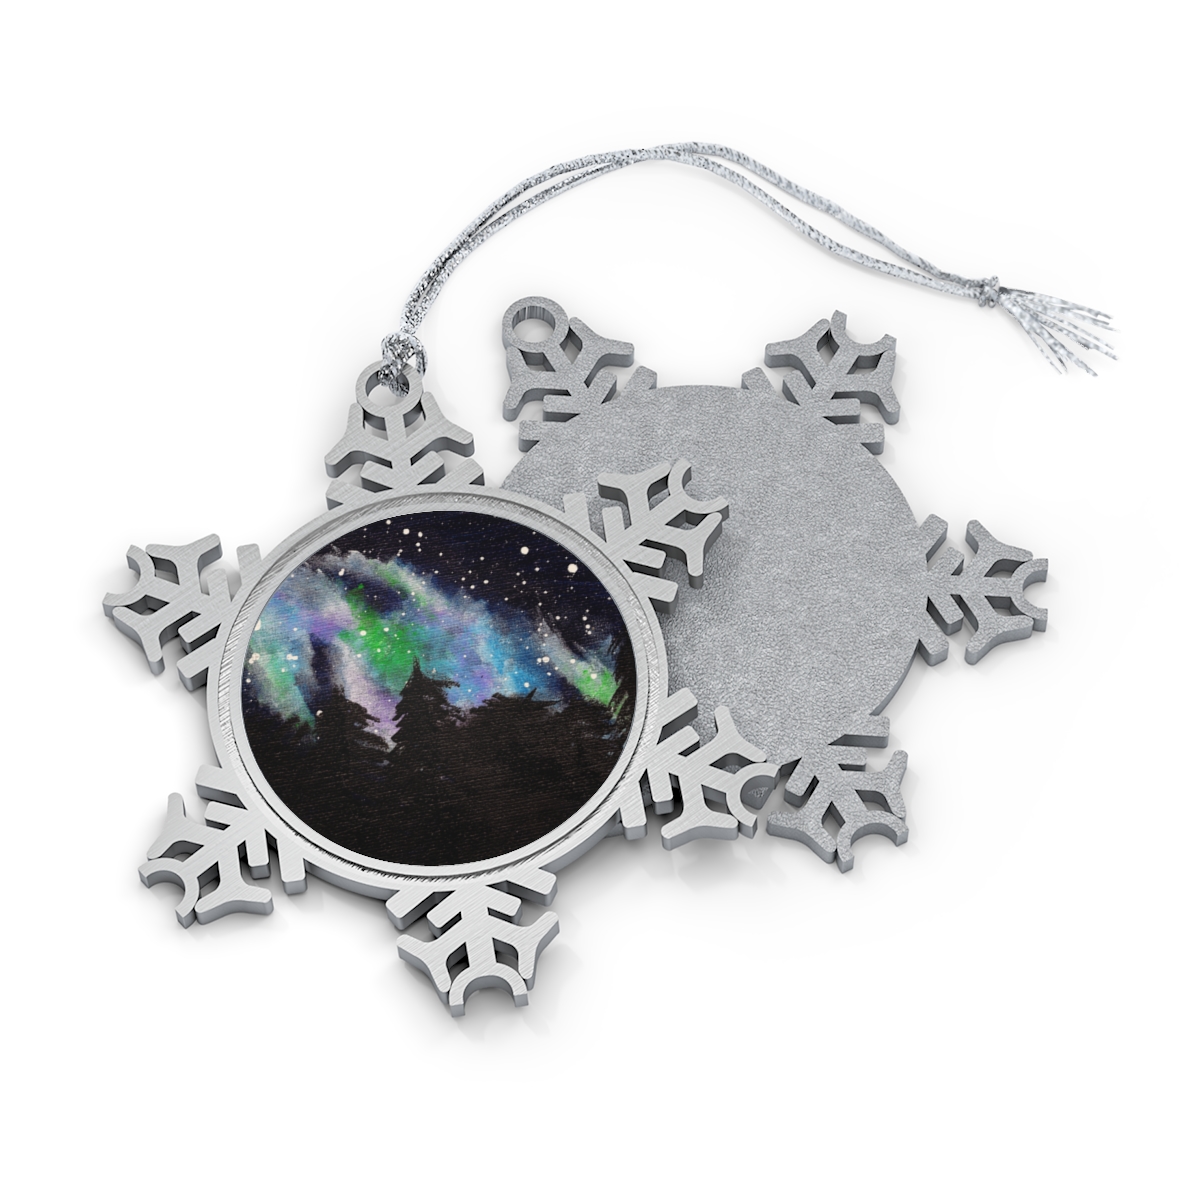 Pewter Snowflake Ornament - Getting Chilly